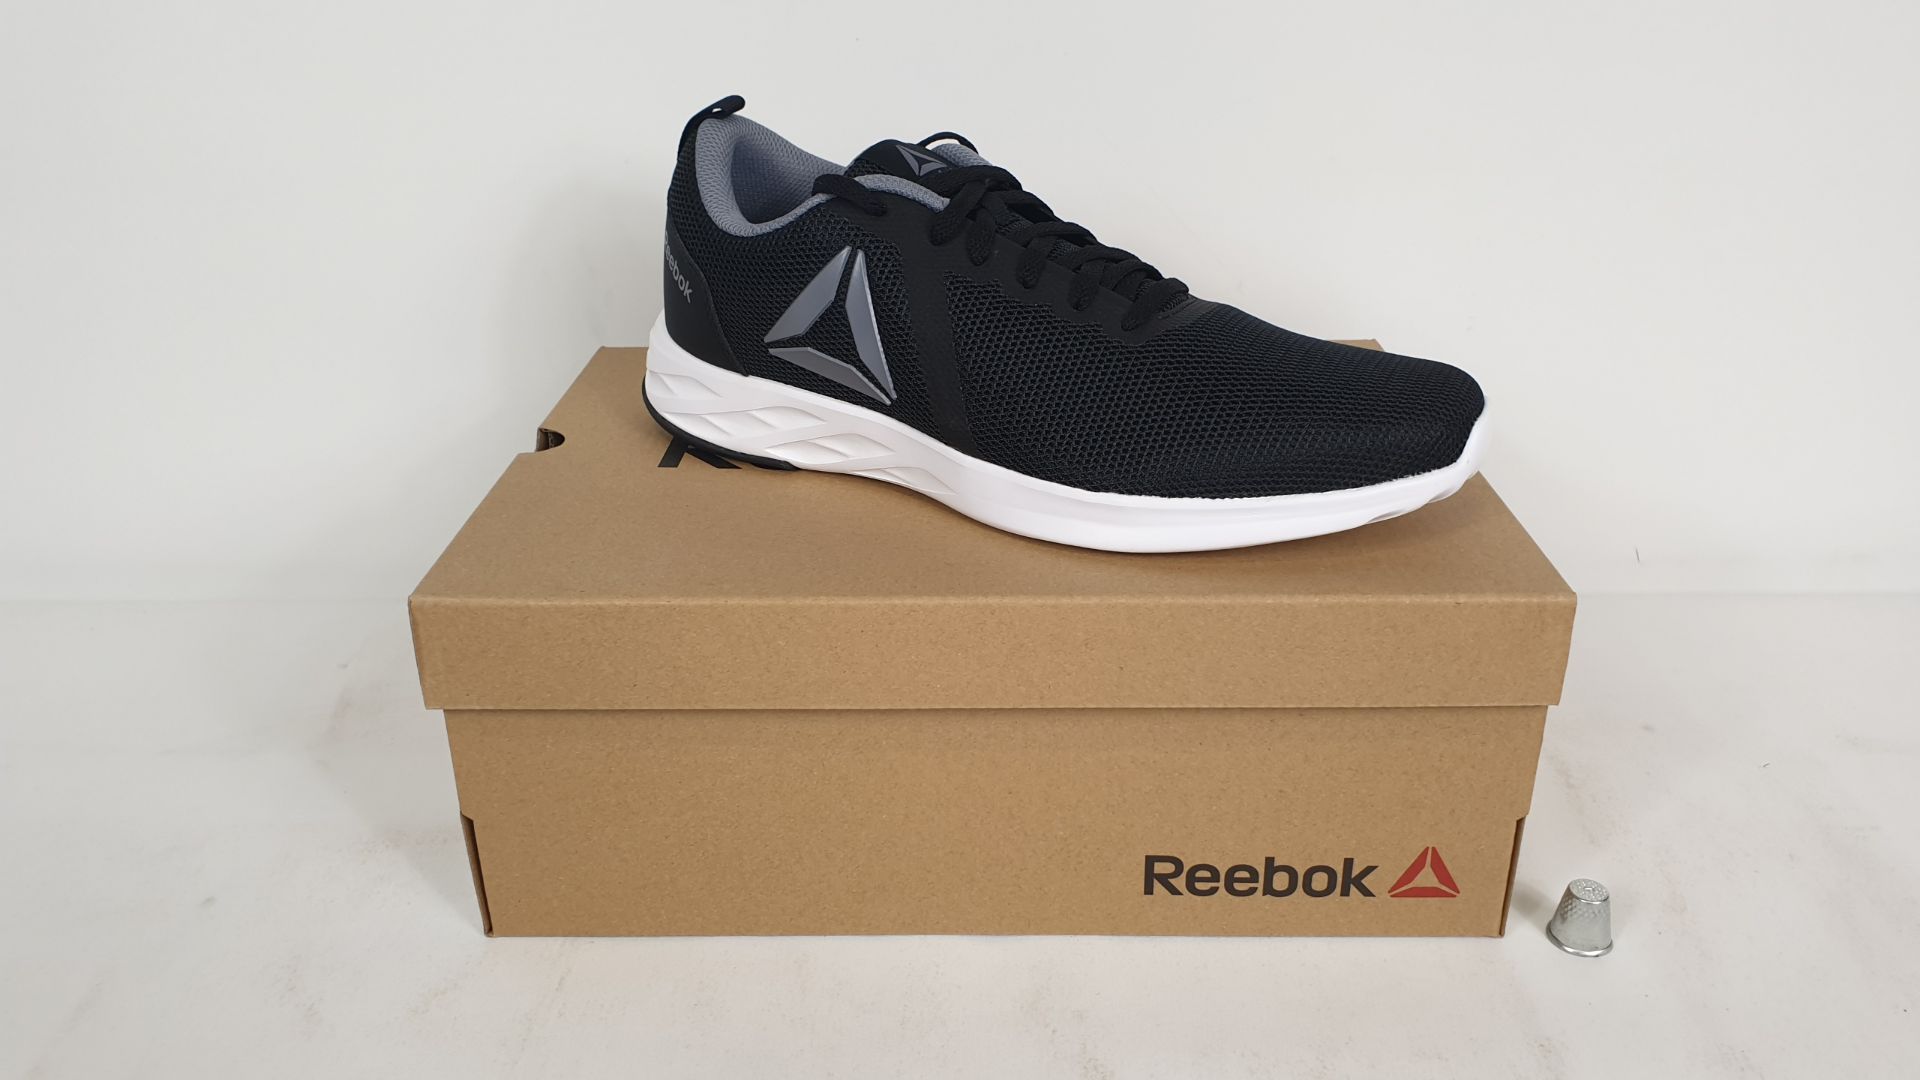 6 X PAIRS OF REEBOK TRAINERS ASTRO RIDE ESSENTIAL BLACK/ WHITE SIZE 9 - BRAND NEW AND BOXED